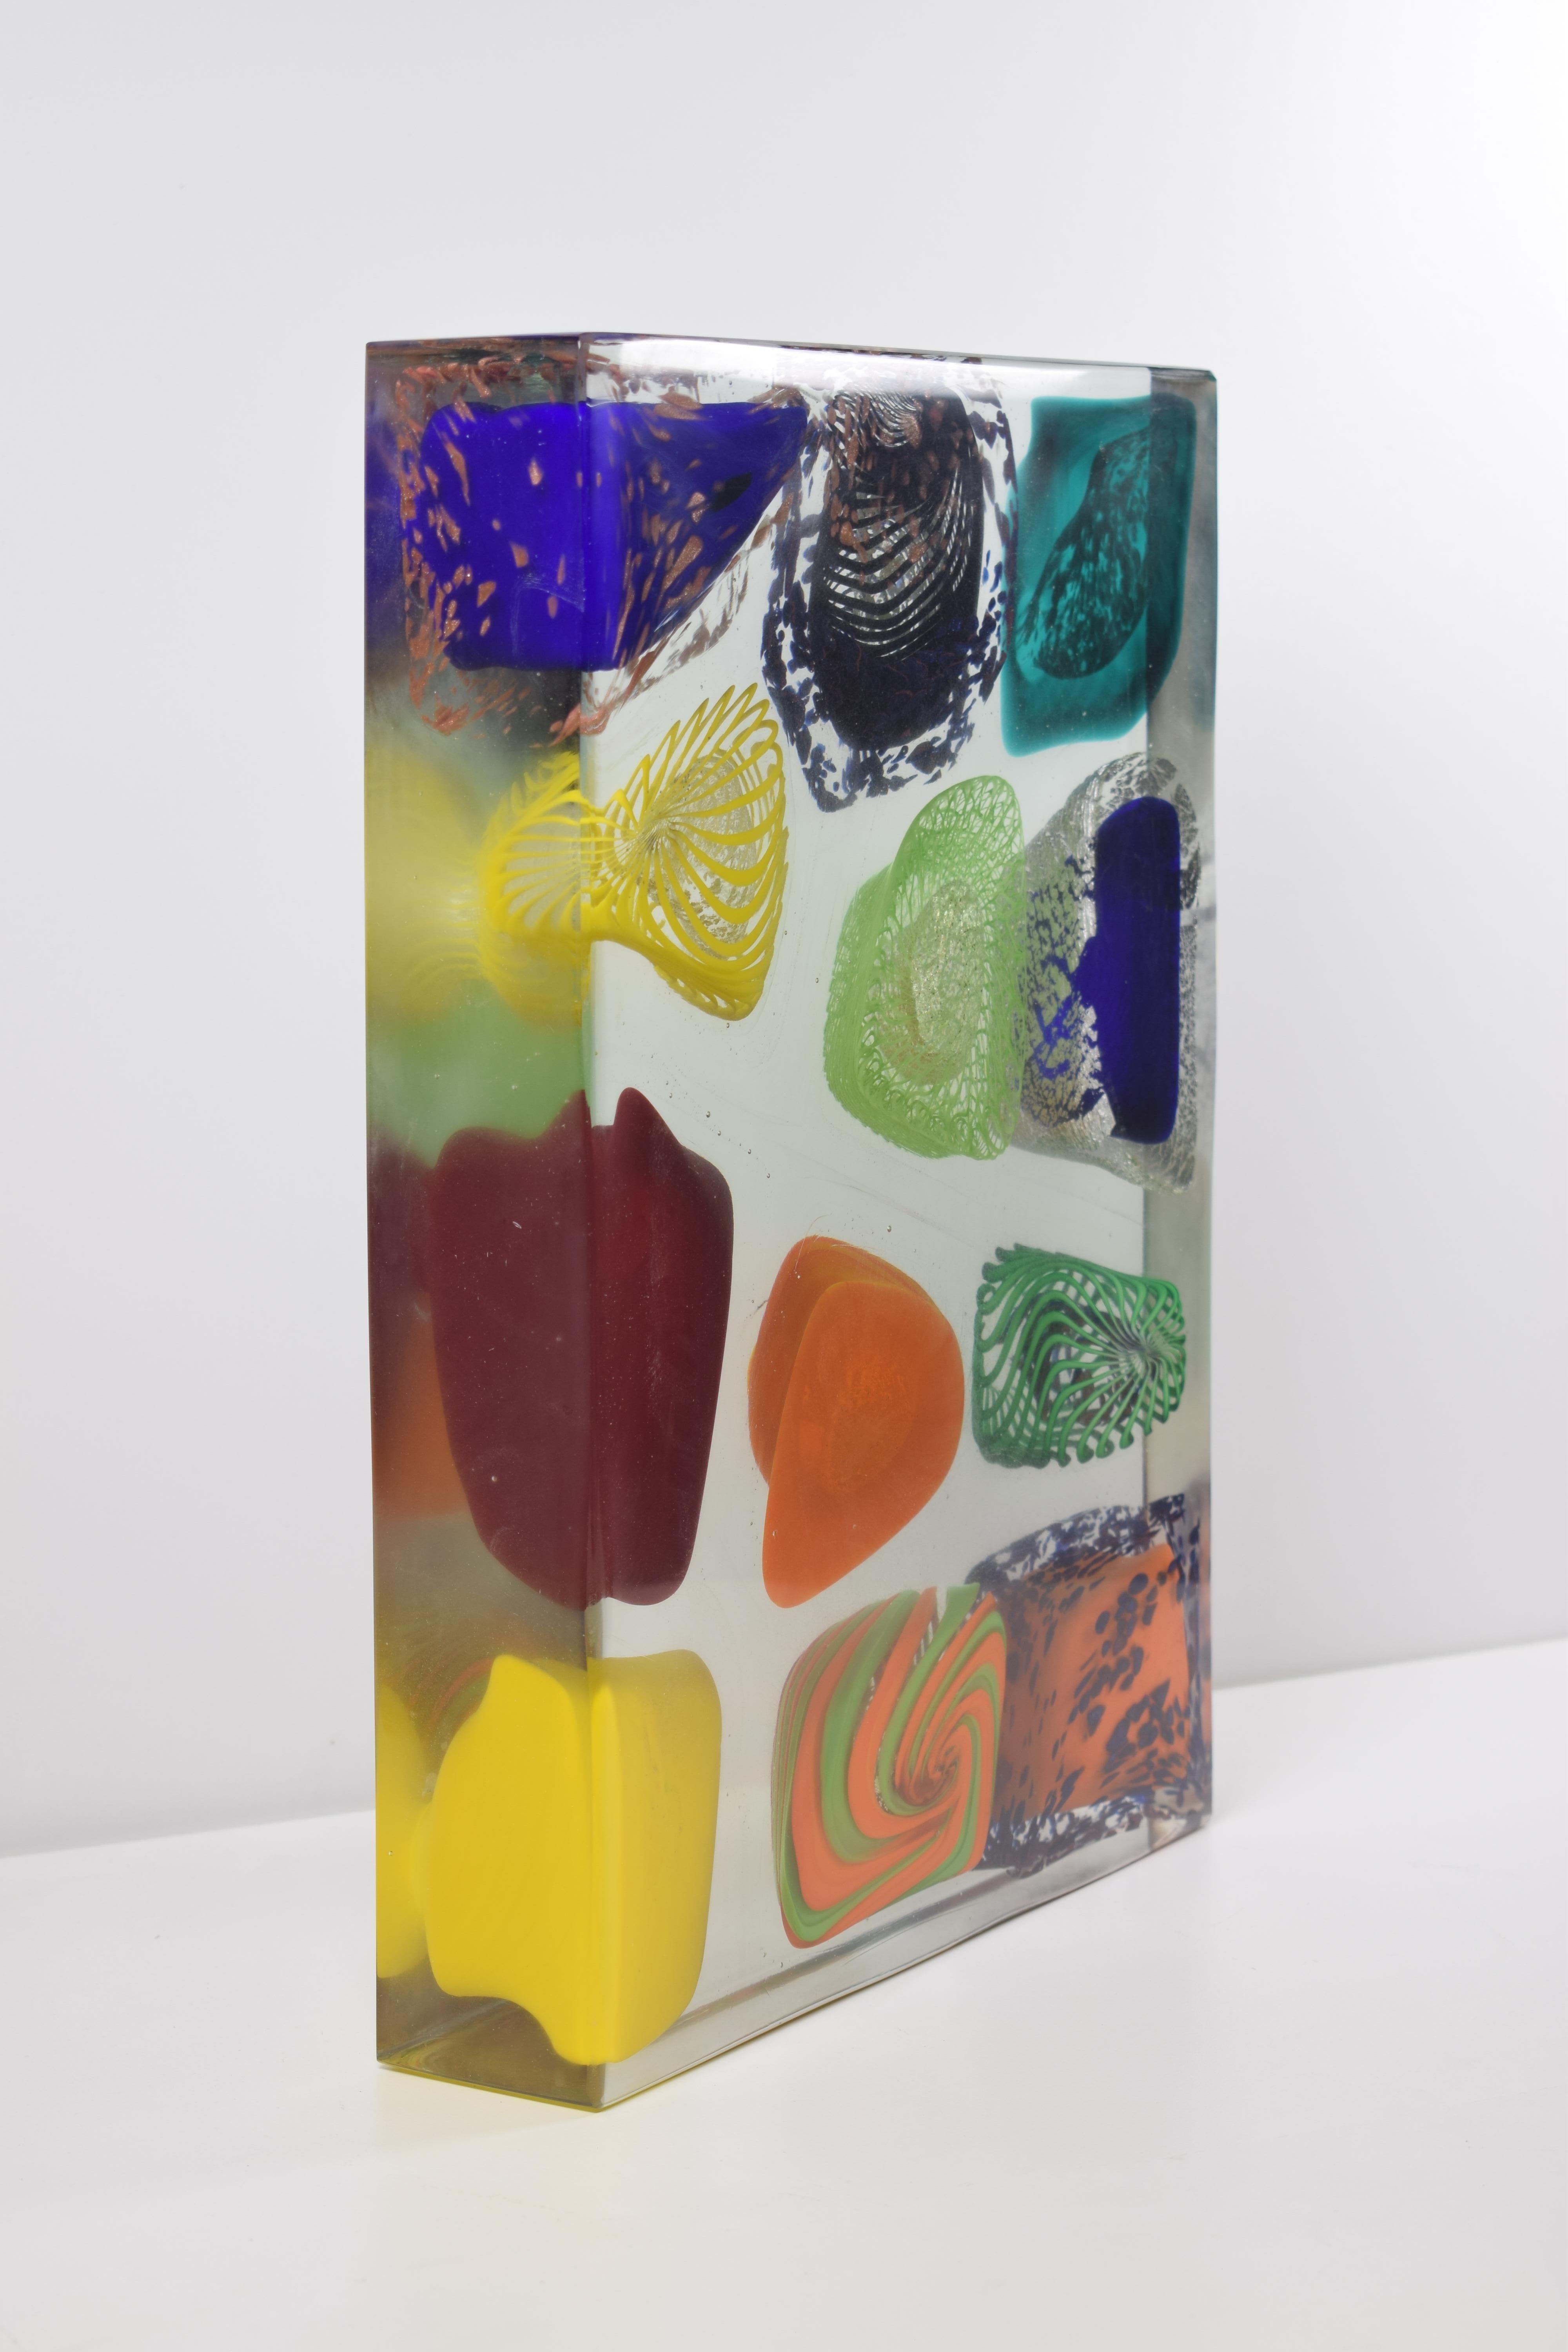 Murano artistic glass monolith. The Murano artistic glass sculpture is a creative and natural expression of the artist Eros Raffael, made with transparent and pastel glass rods, silver, pure gold, gold aventurine, zanfirico e filigrana with a